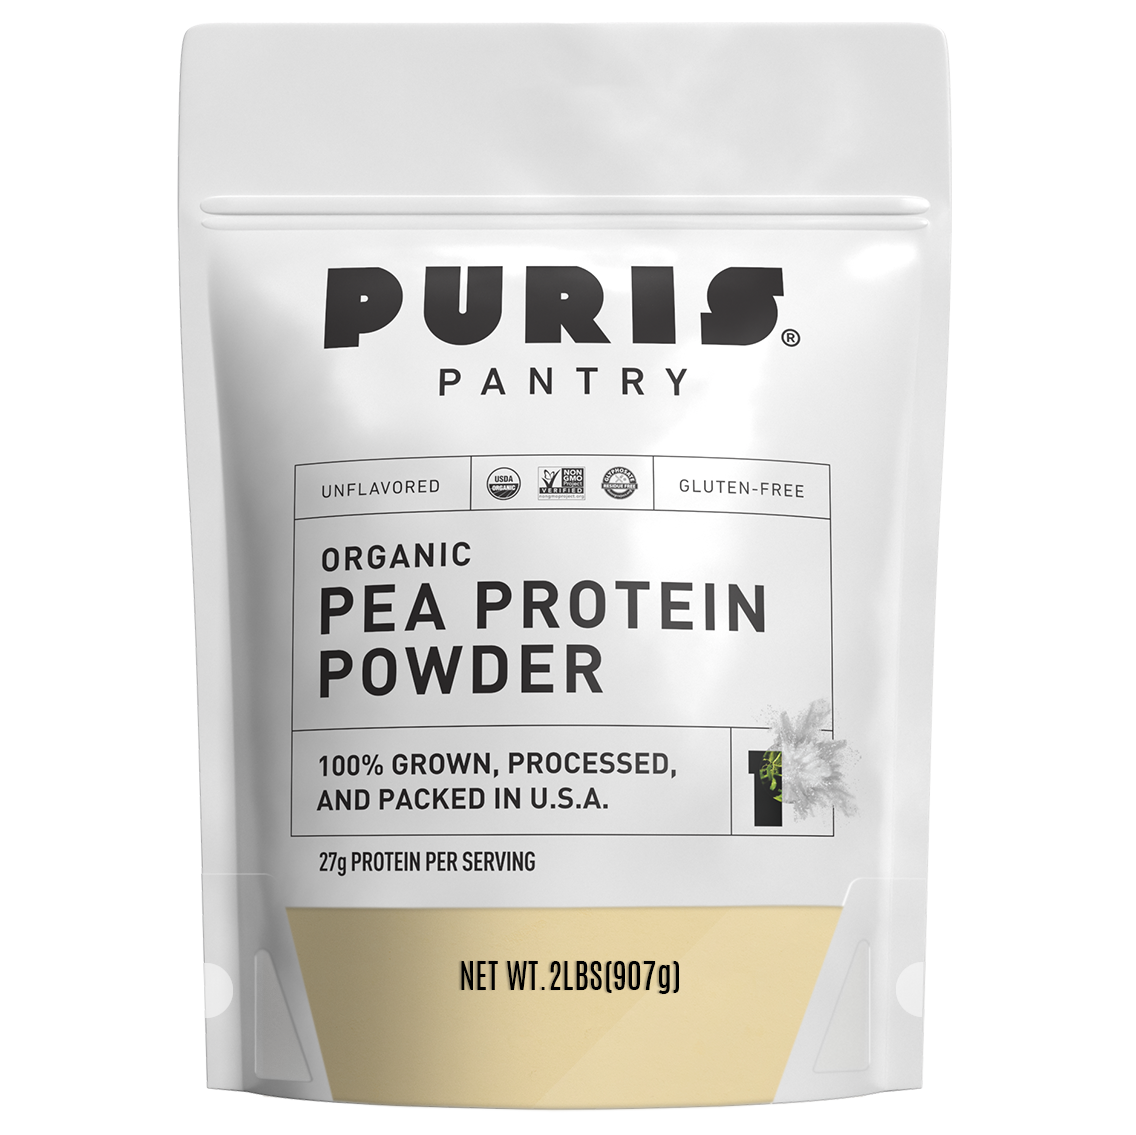 Organic-Pea-Protein-Powder-3D-Render-Front-v2-1